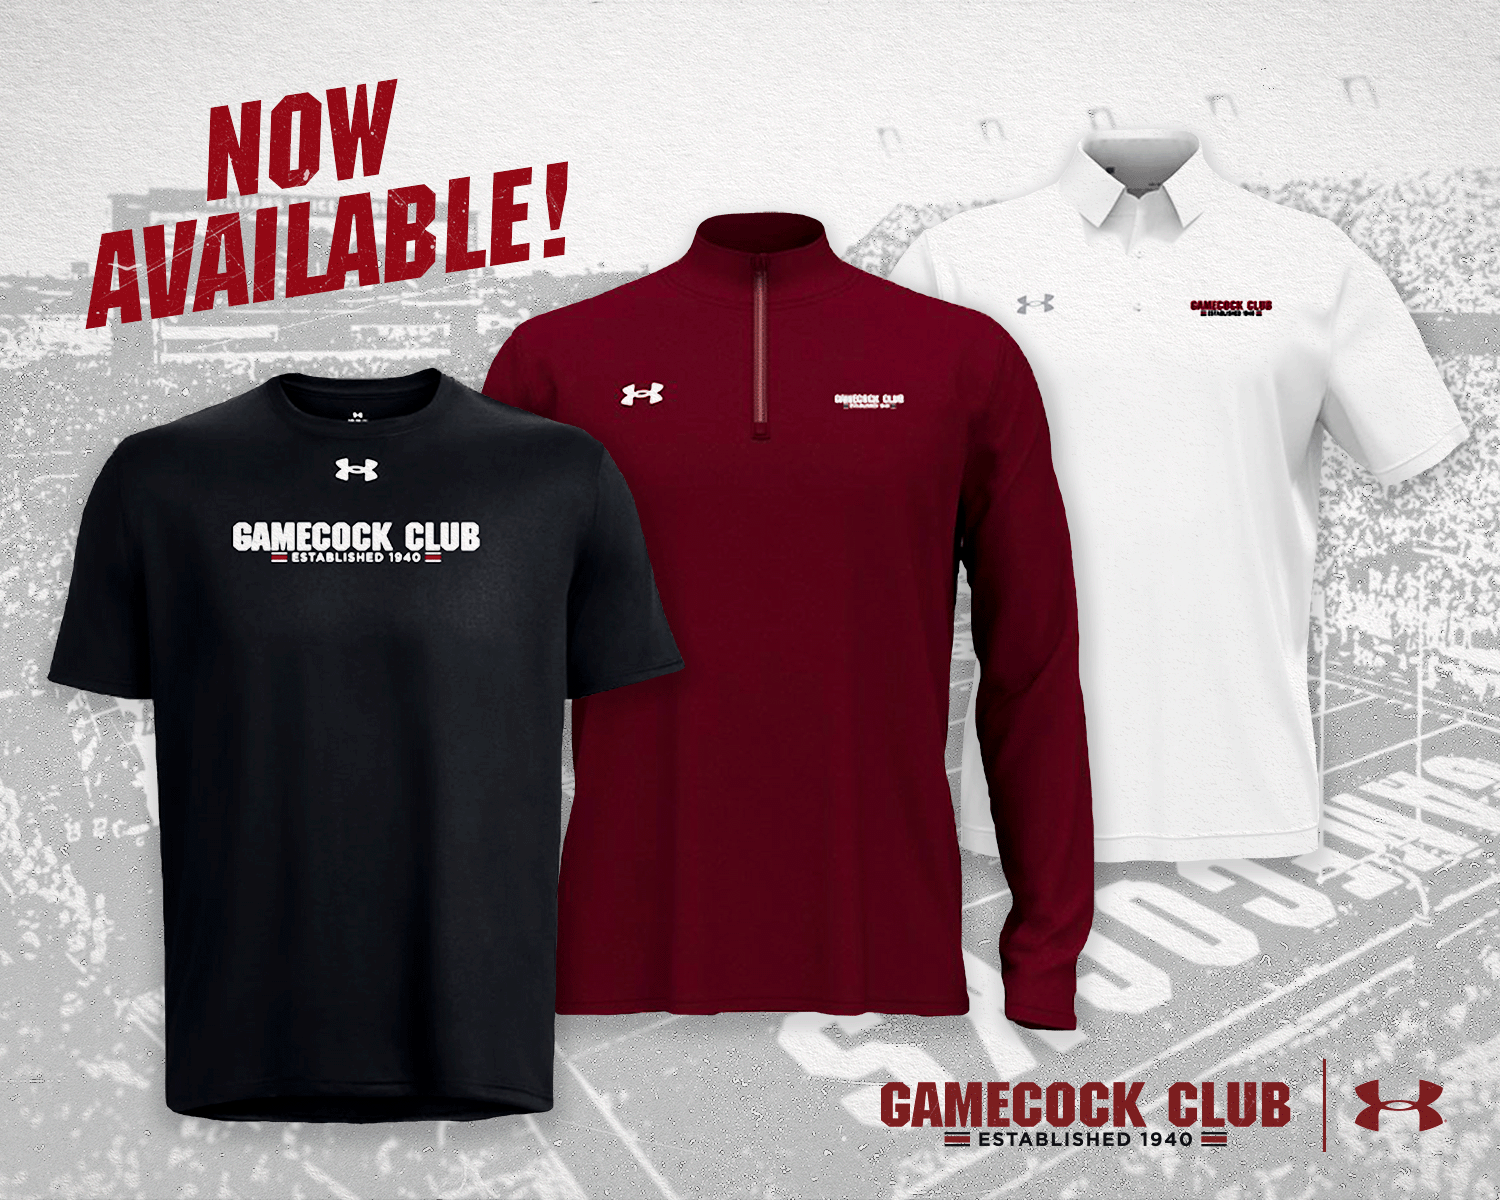 Gamecock Club Launches Merchandise Store